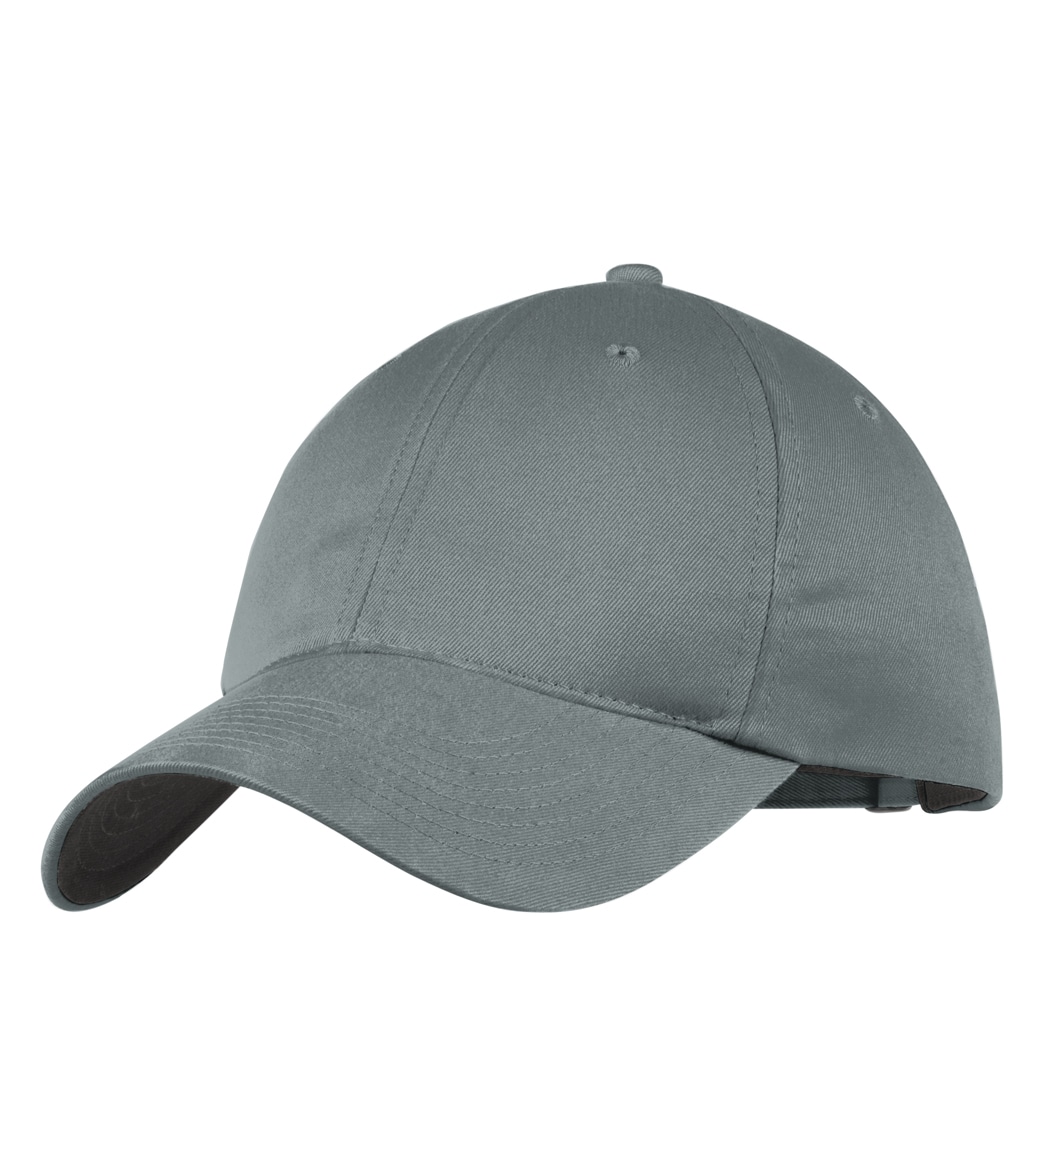 Nike Unstructured Twill Hat - Dark Grey One Size Cotton - Swimoutlet.com